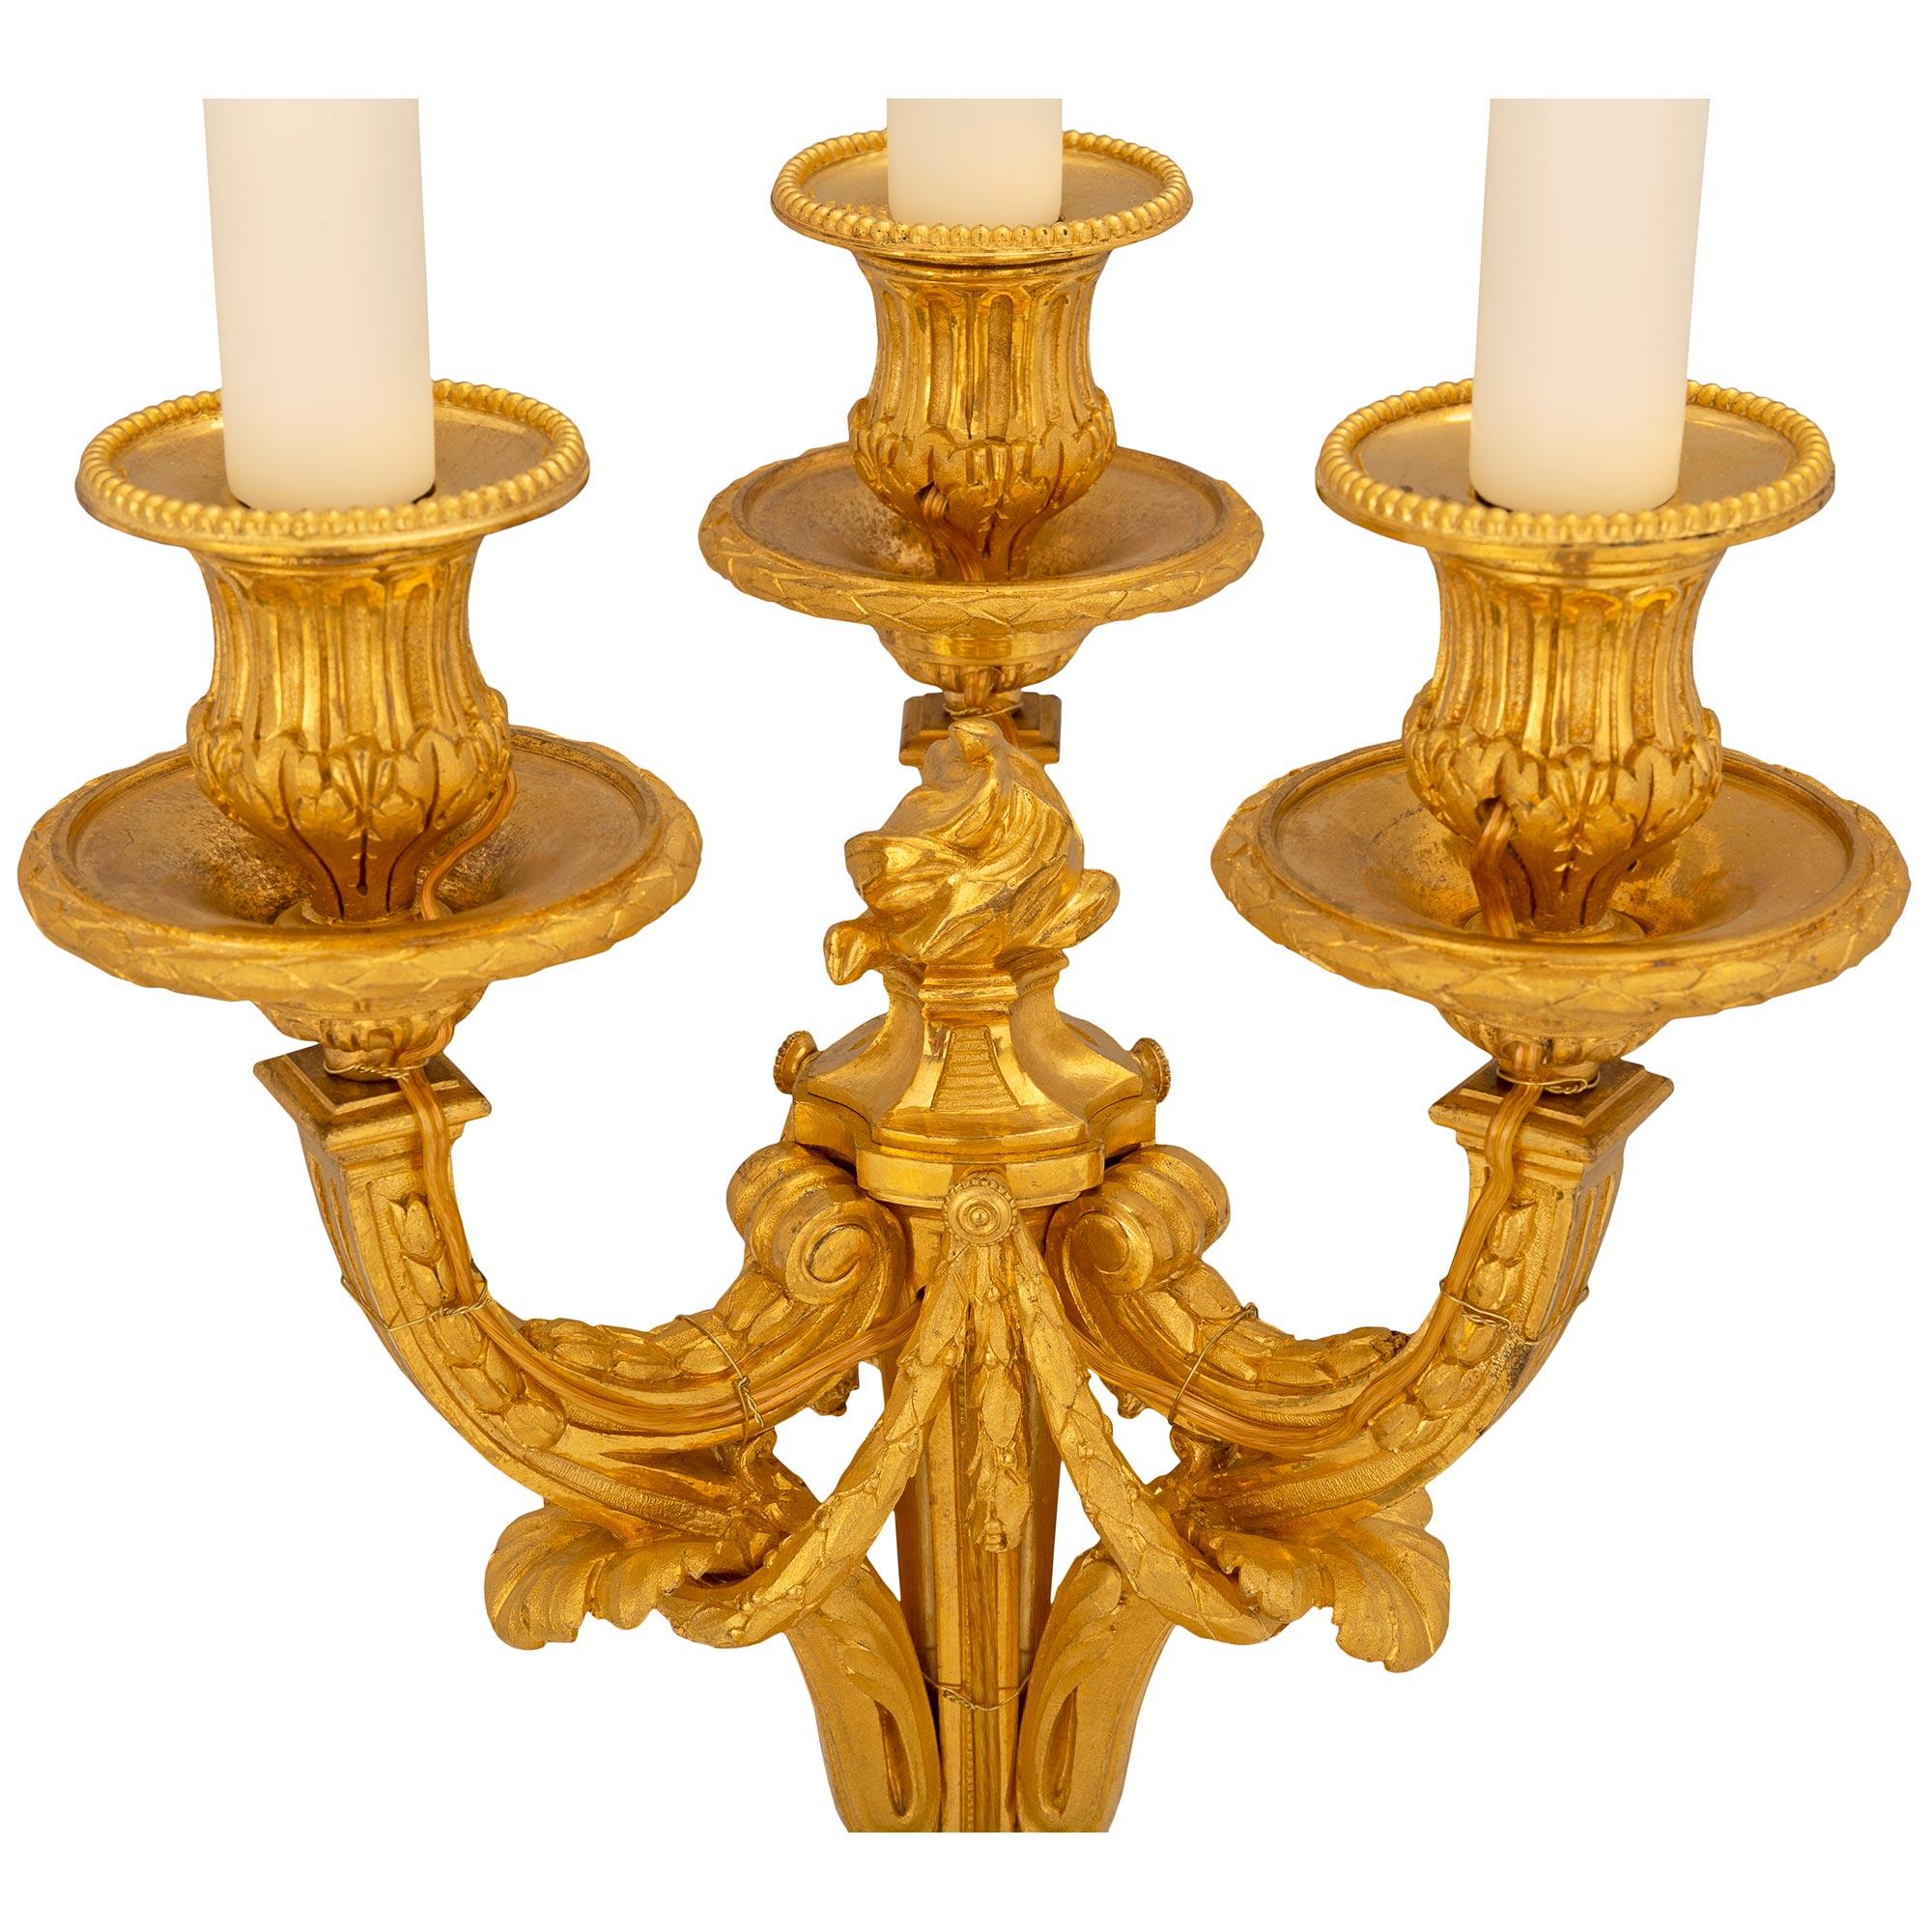 French Mid-19th Century Louis XVI St. Ormolu Three-Light Candelabra Lamps In Good Condition For Sale In West Palm Beach, FL